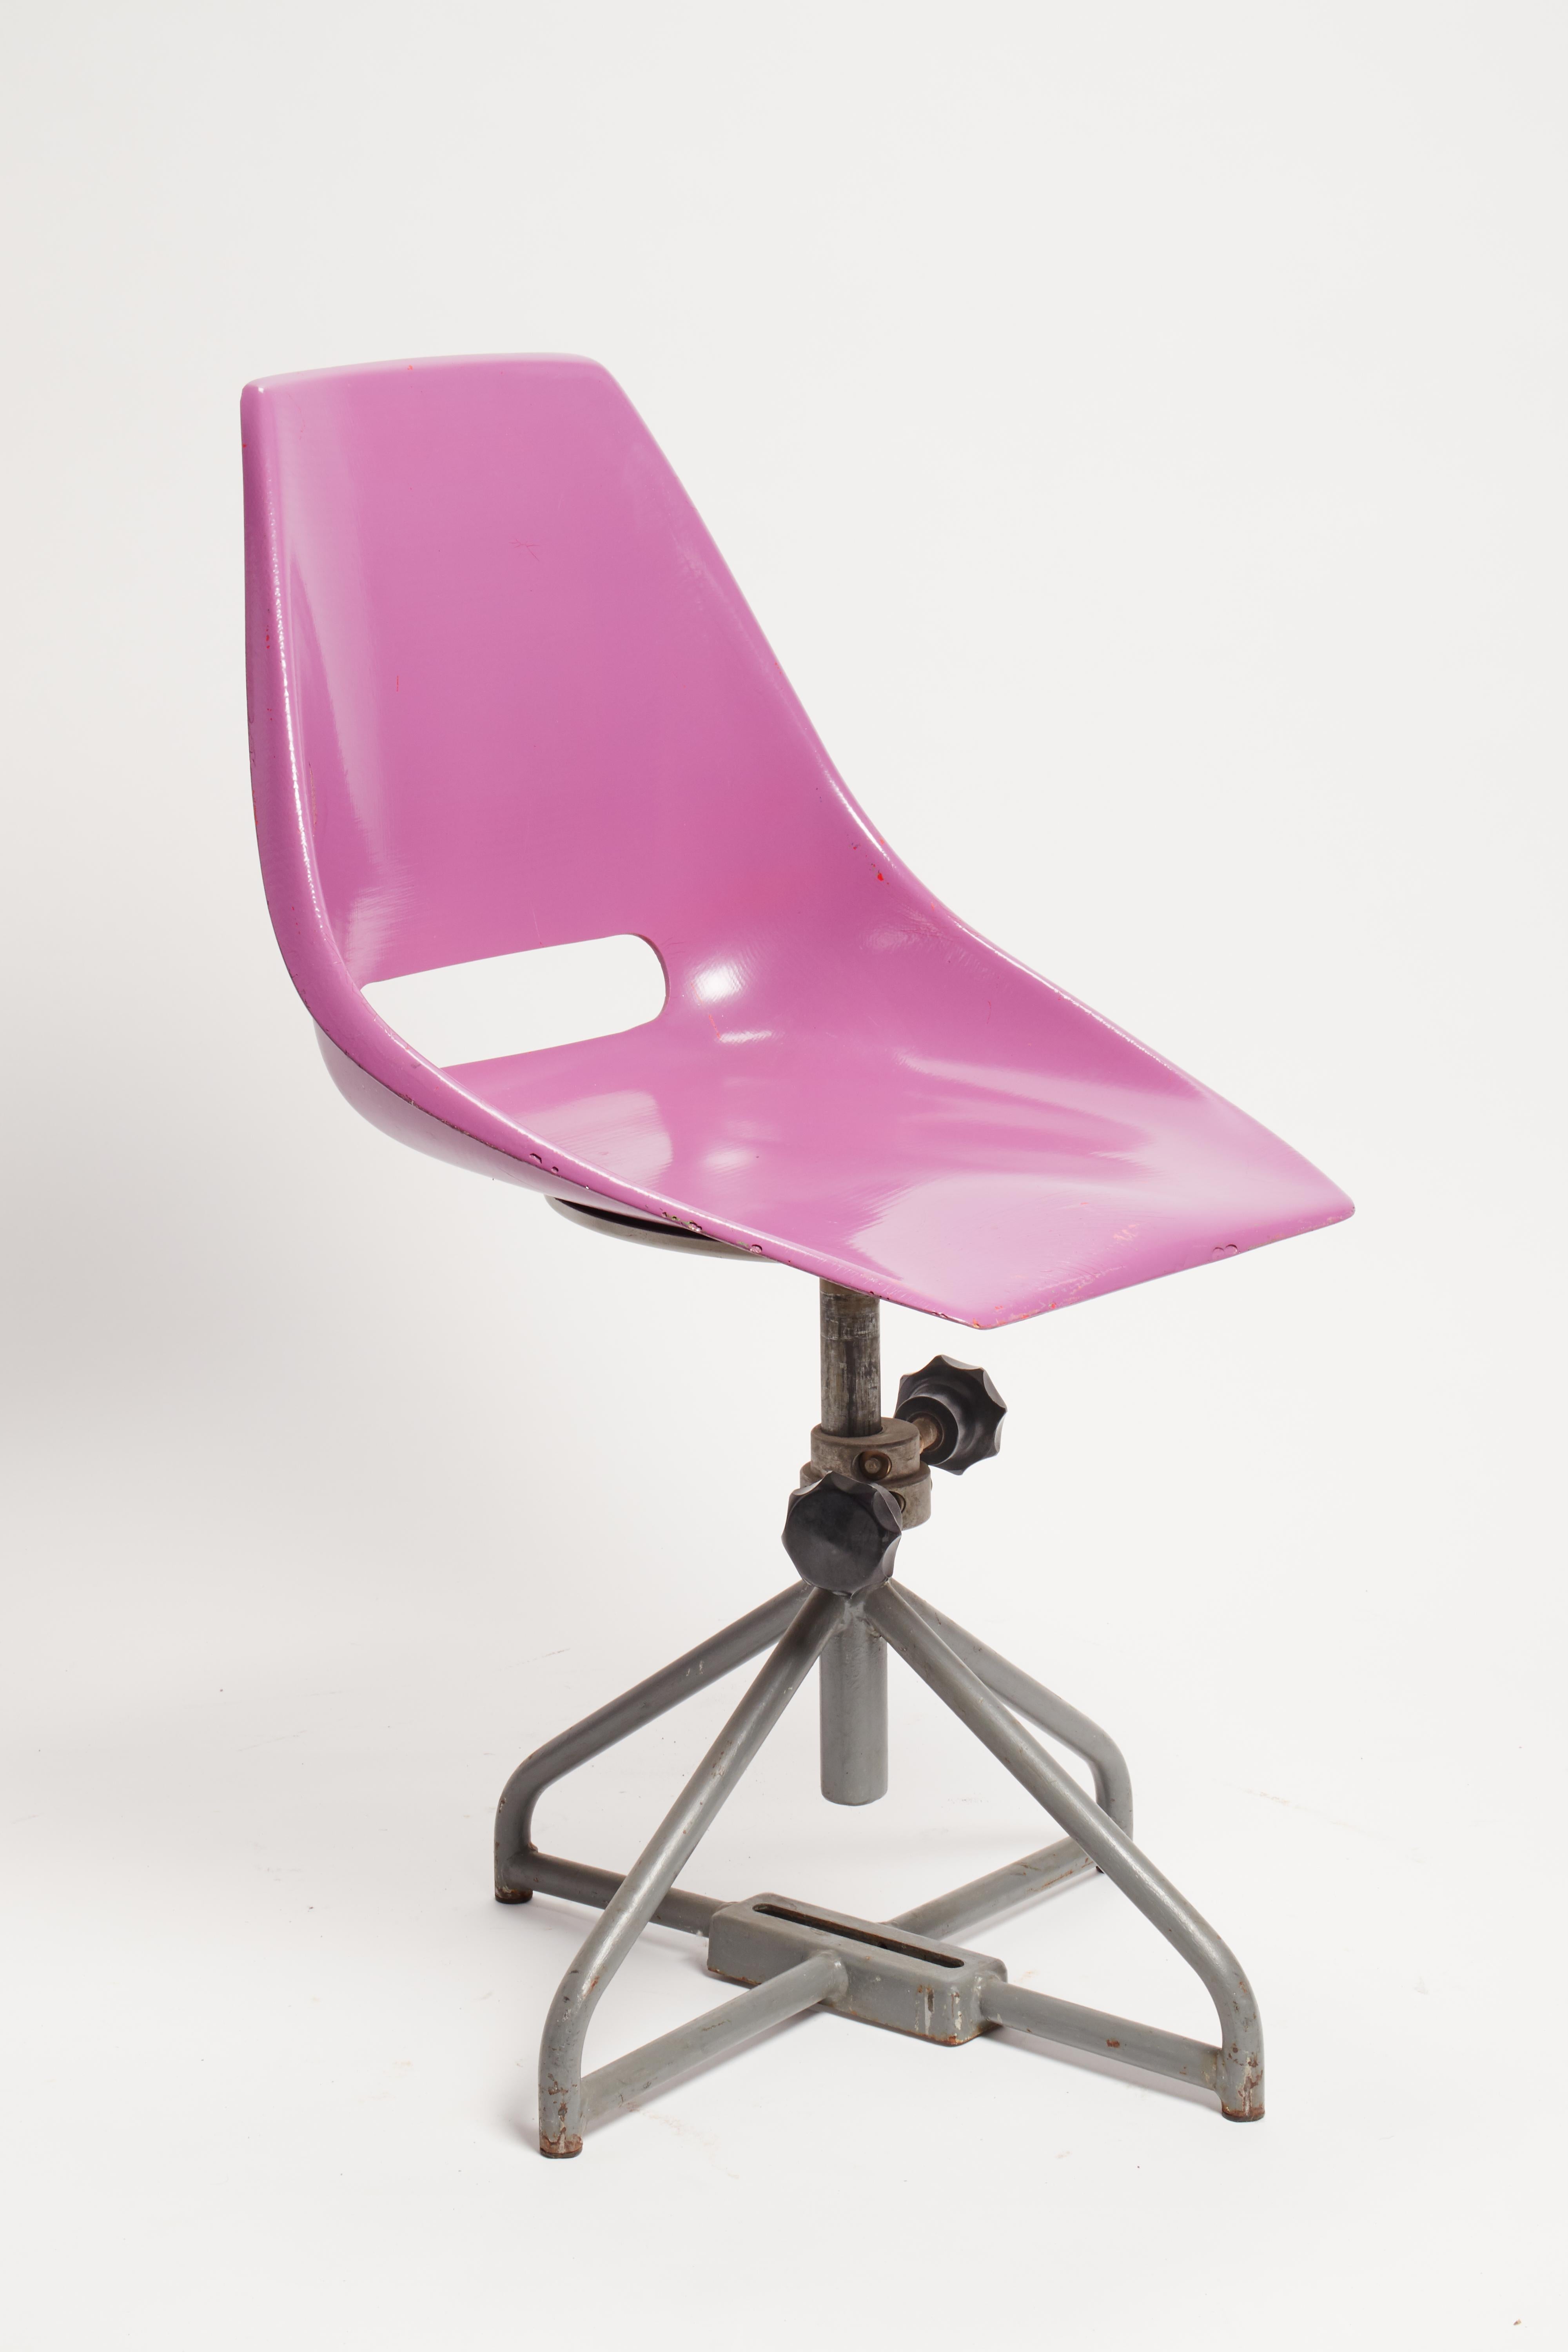 Multicolor Adjustable Fiberglass Chairs, Italy, 1950 For Sale 8